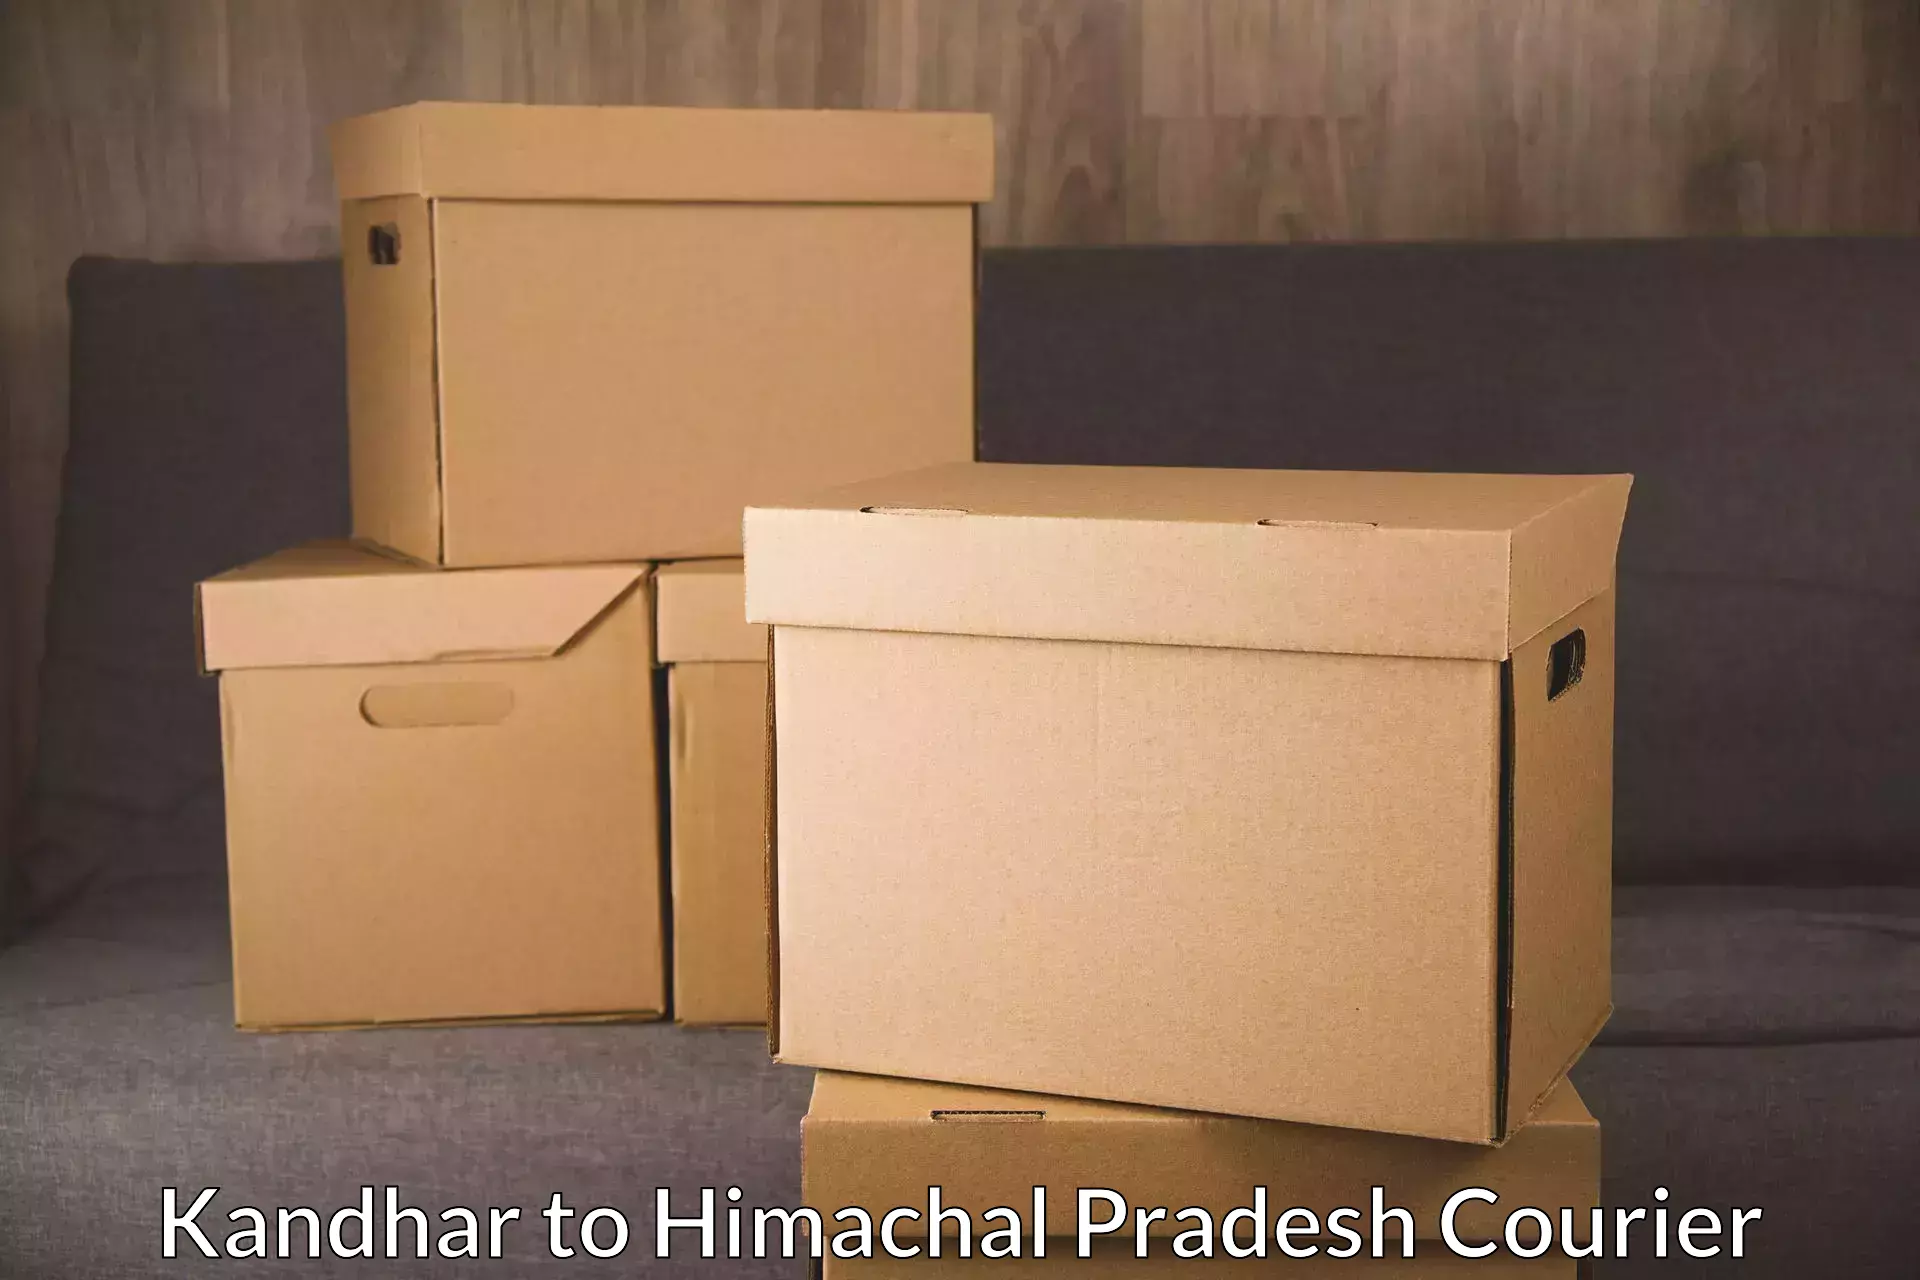 State-of-the-art courier technology Kandhar to Una Himachal Pradesh